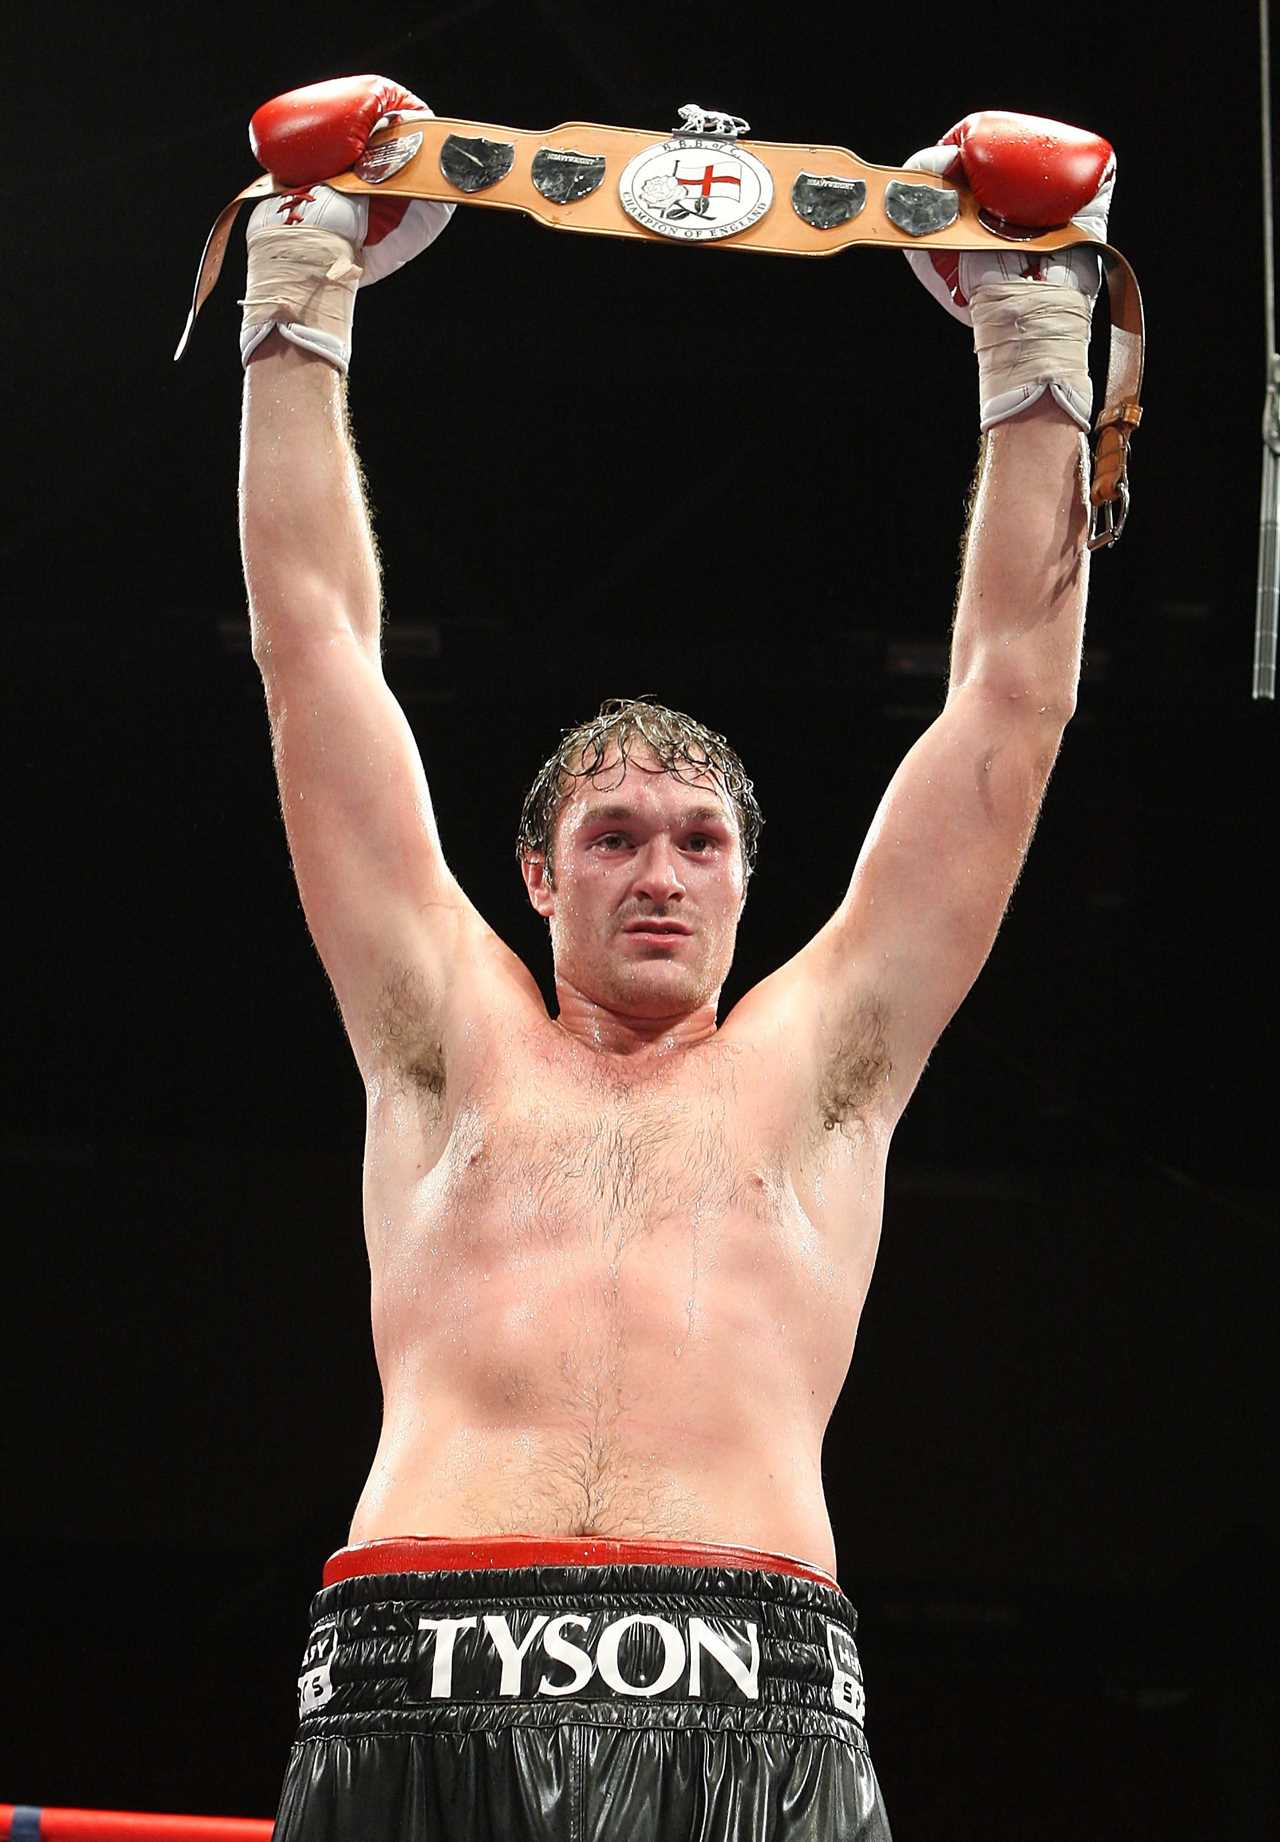 Tyson Fury may have lost his unbeaten record in fights to John McDermott, a railway worker, in his early years before his epic rise.